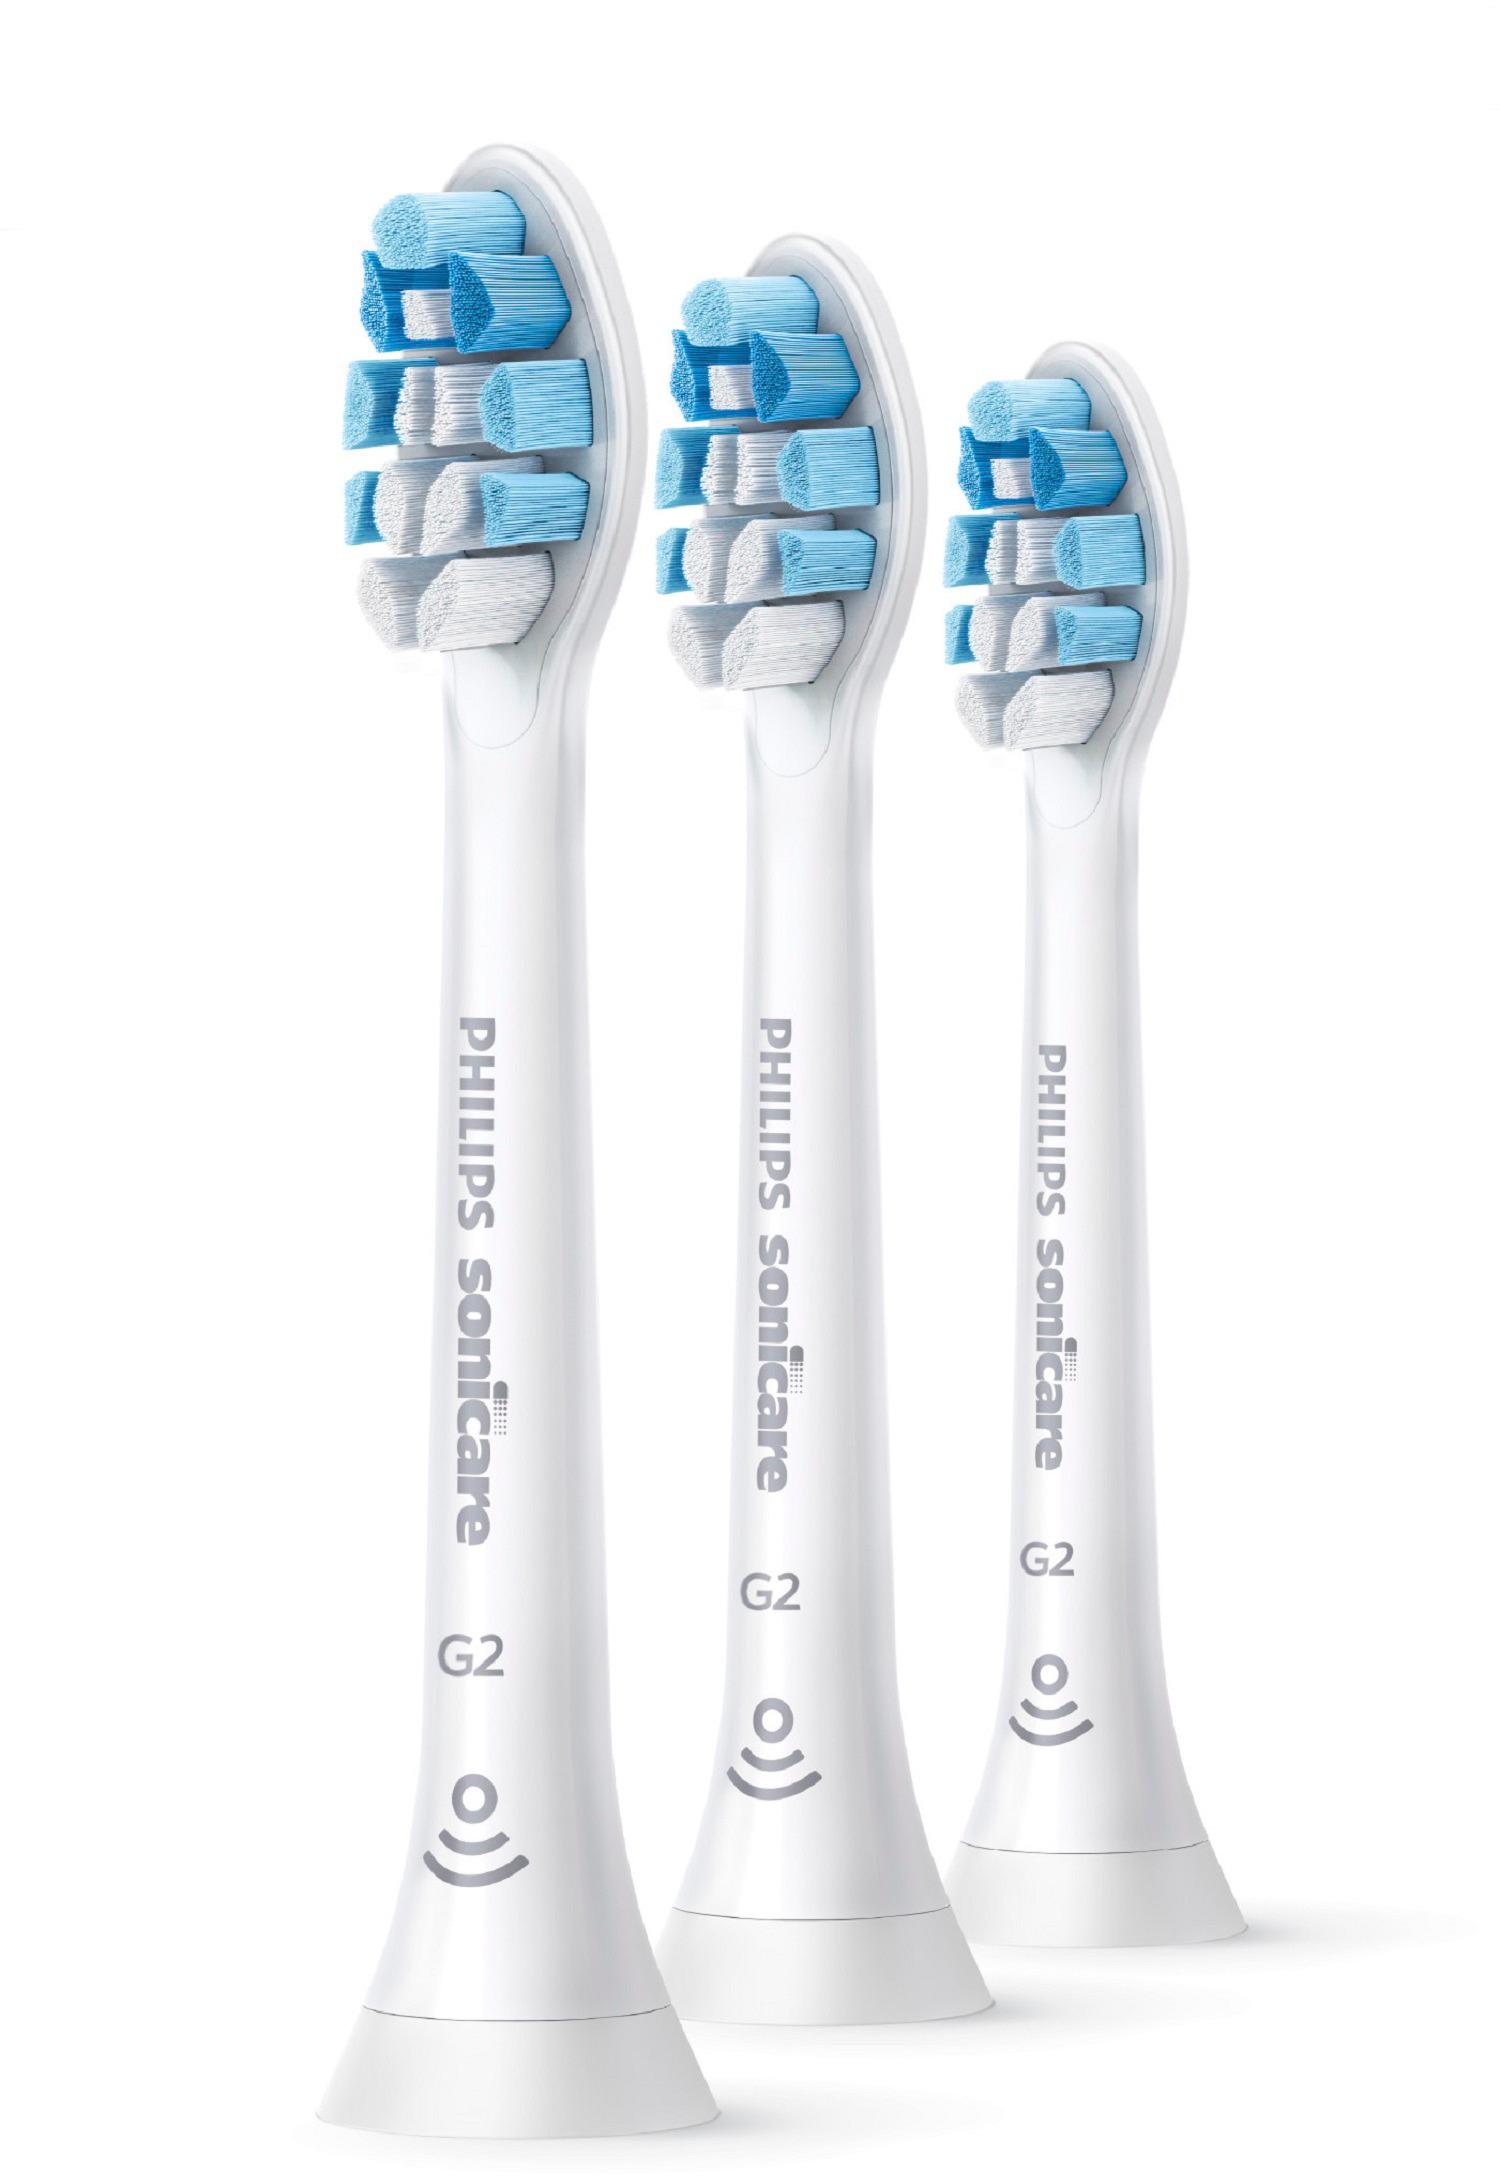 Angle View: Philips Sonicare - Optimal Gum Health Replacement Toothbrush Heads (3-pack) - White